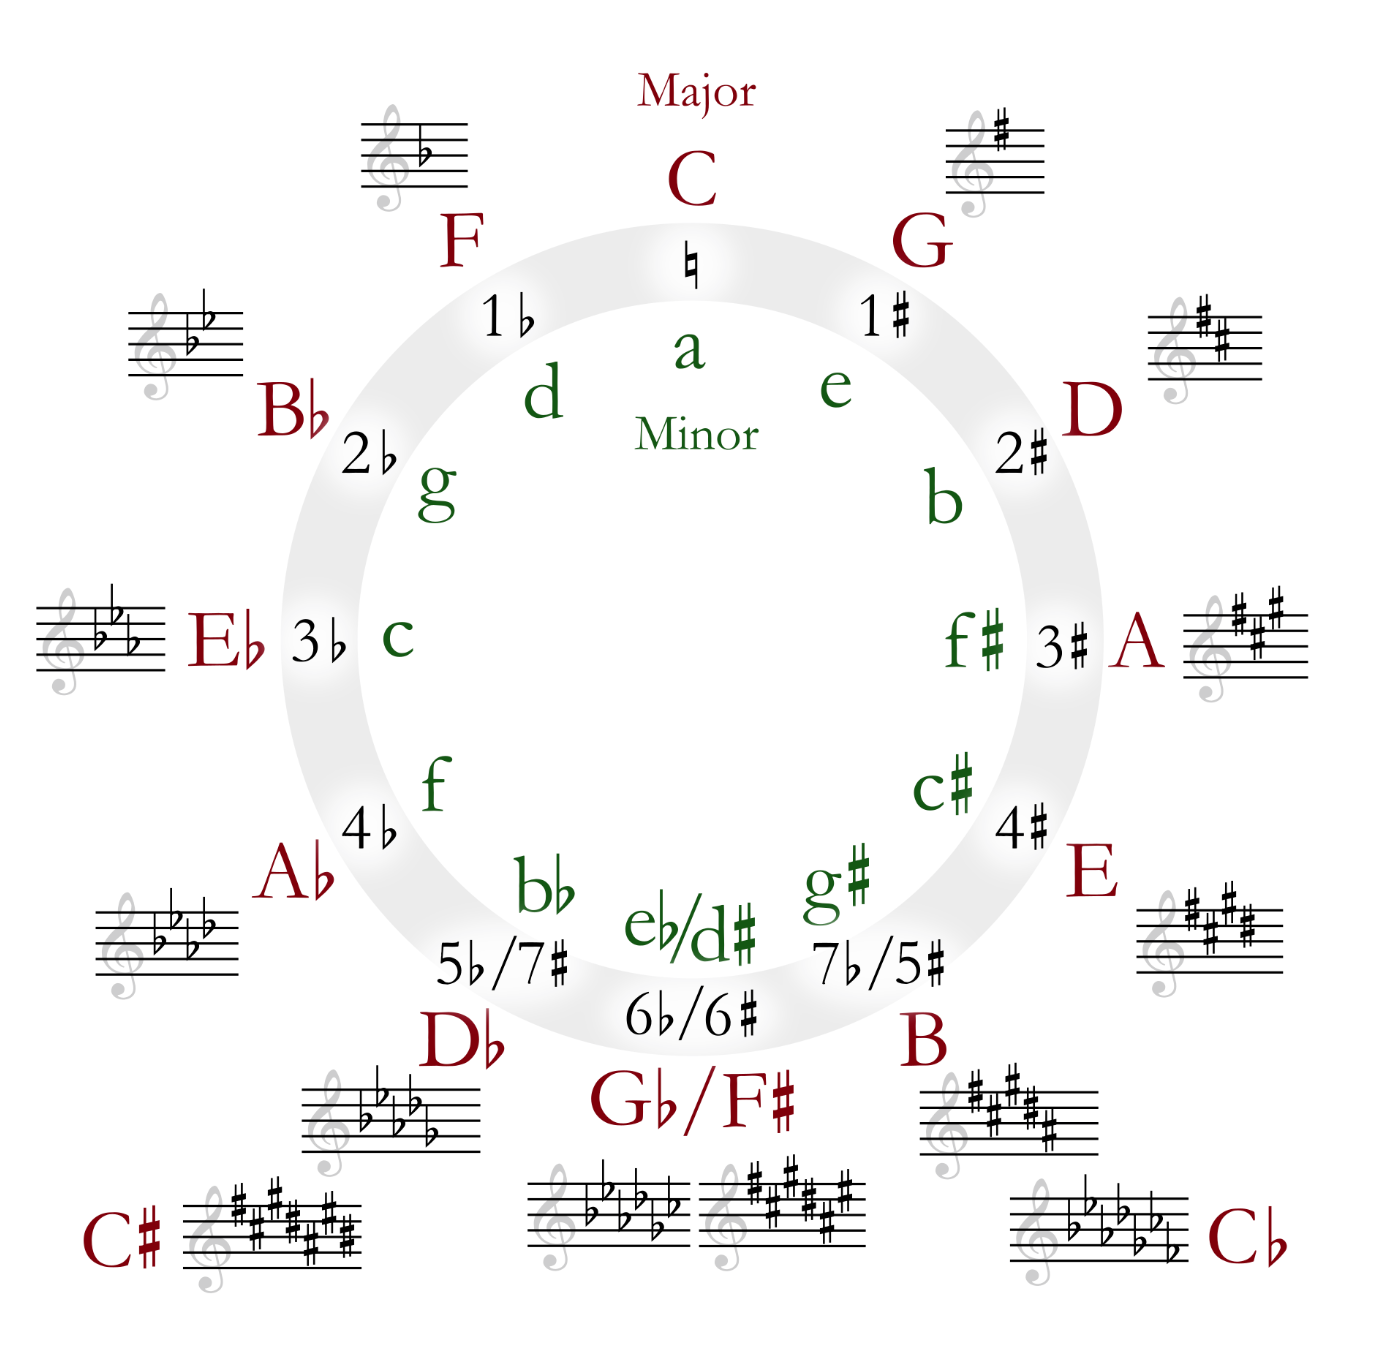 Major Scales: Major and minor keys in the circle of fifths